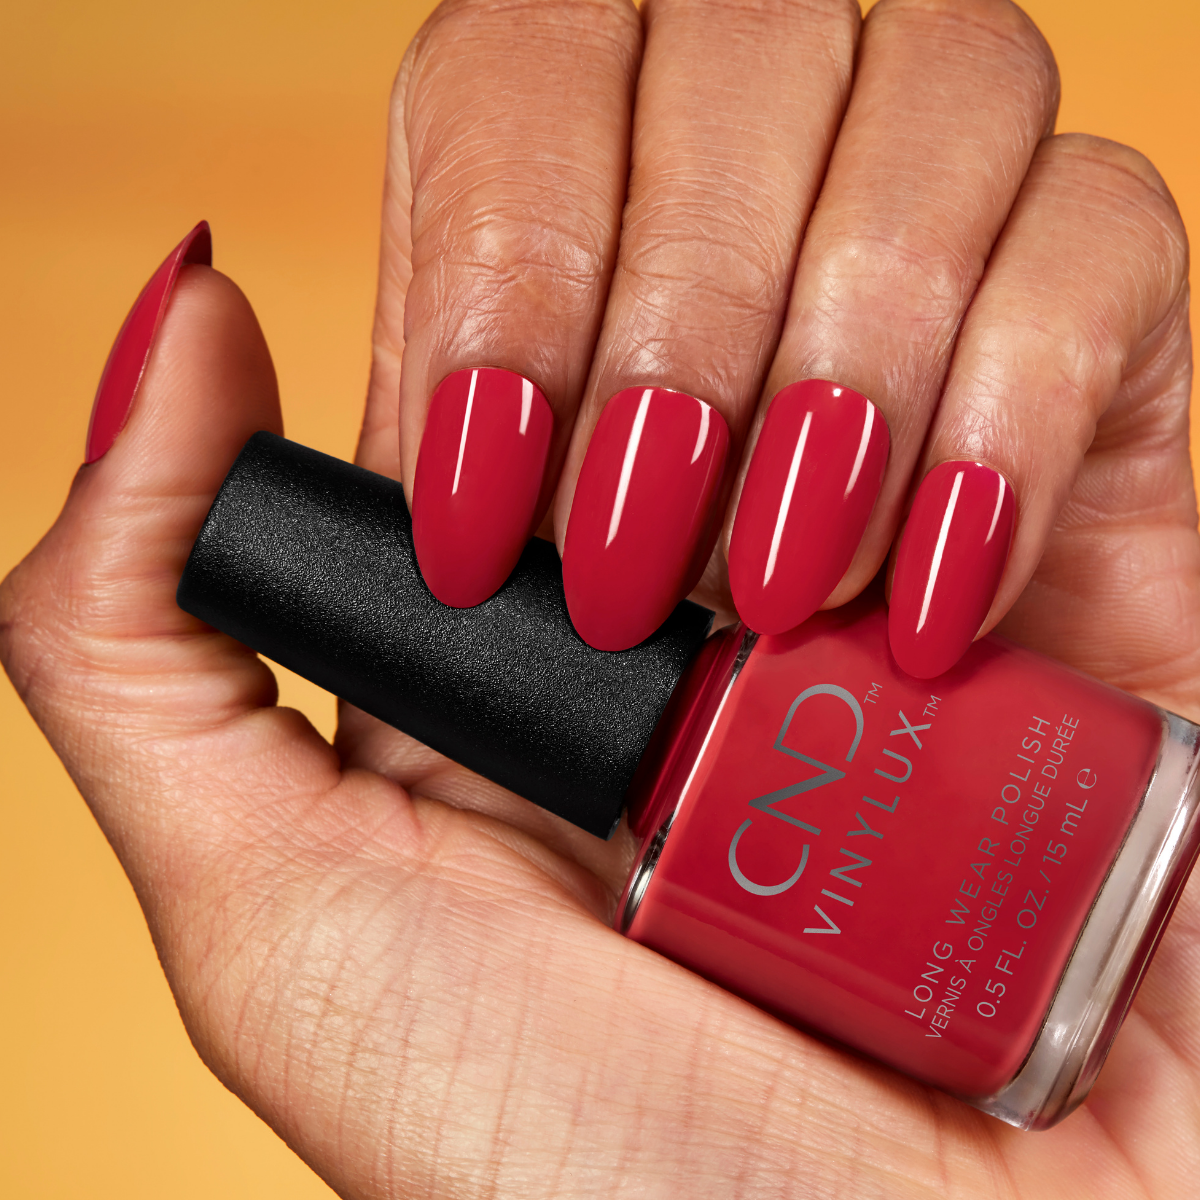 CND Vinylux Soft Flame Nail Swatch